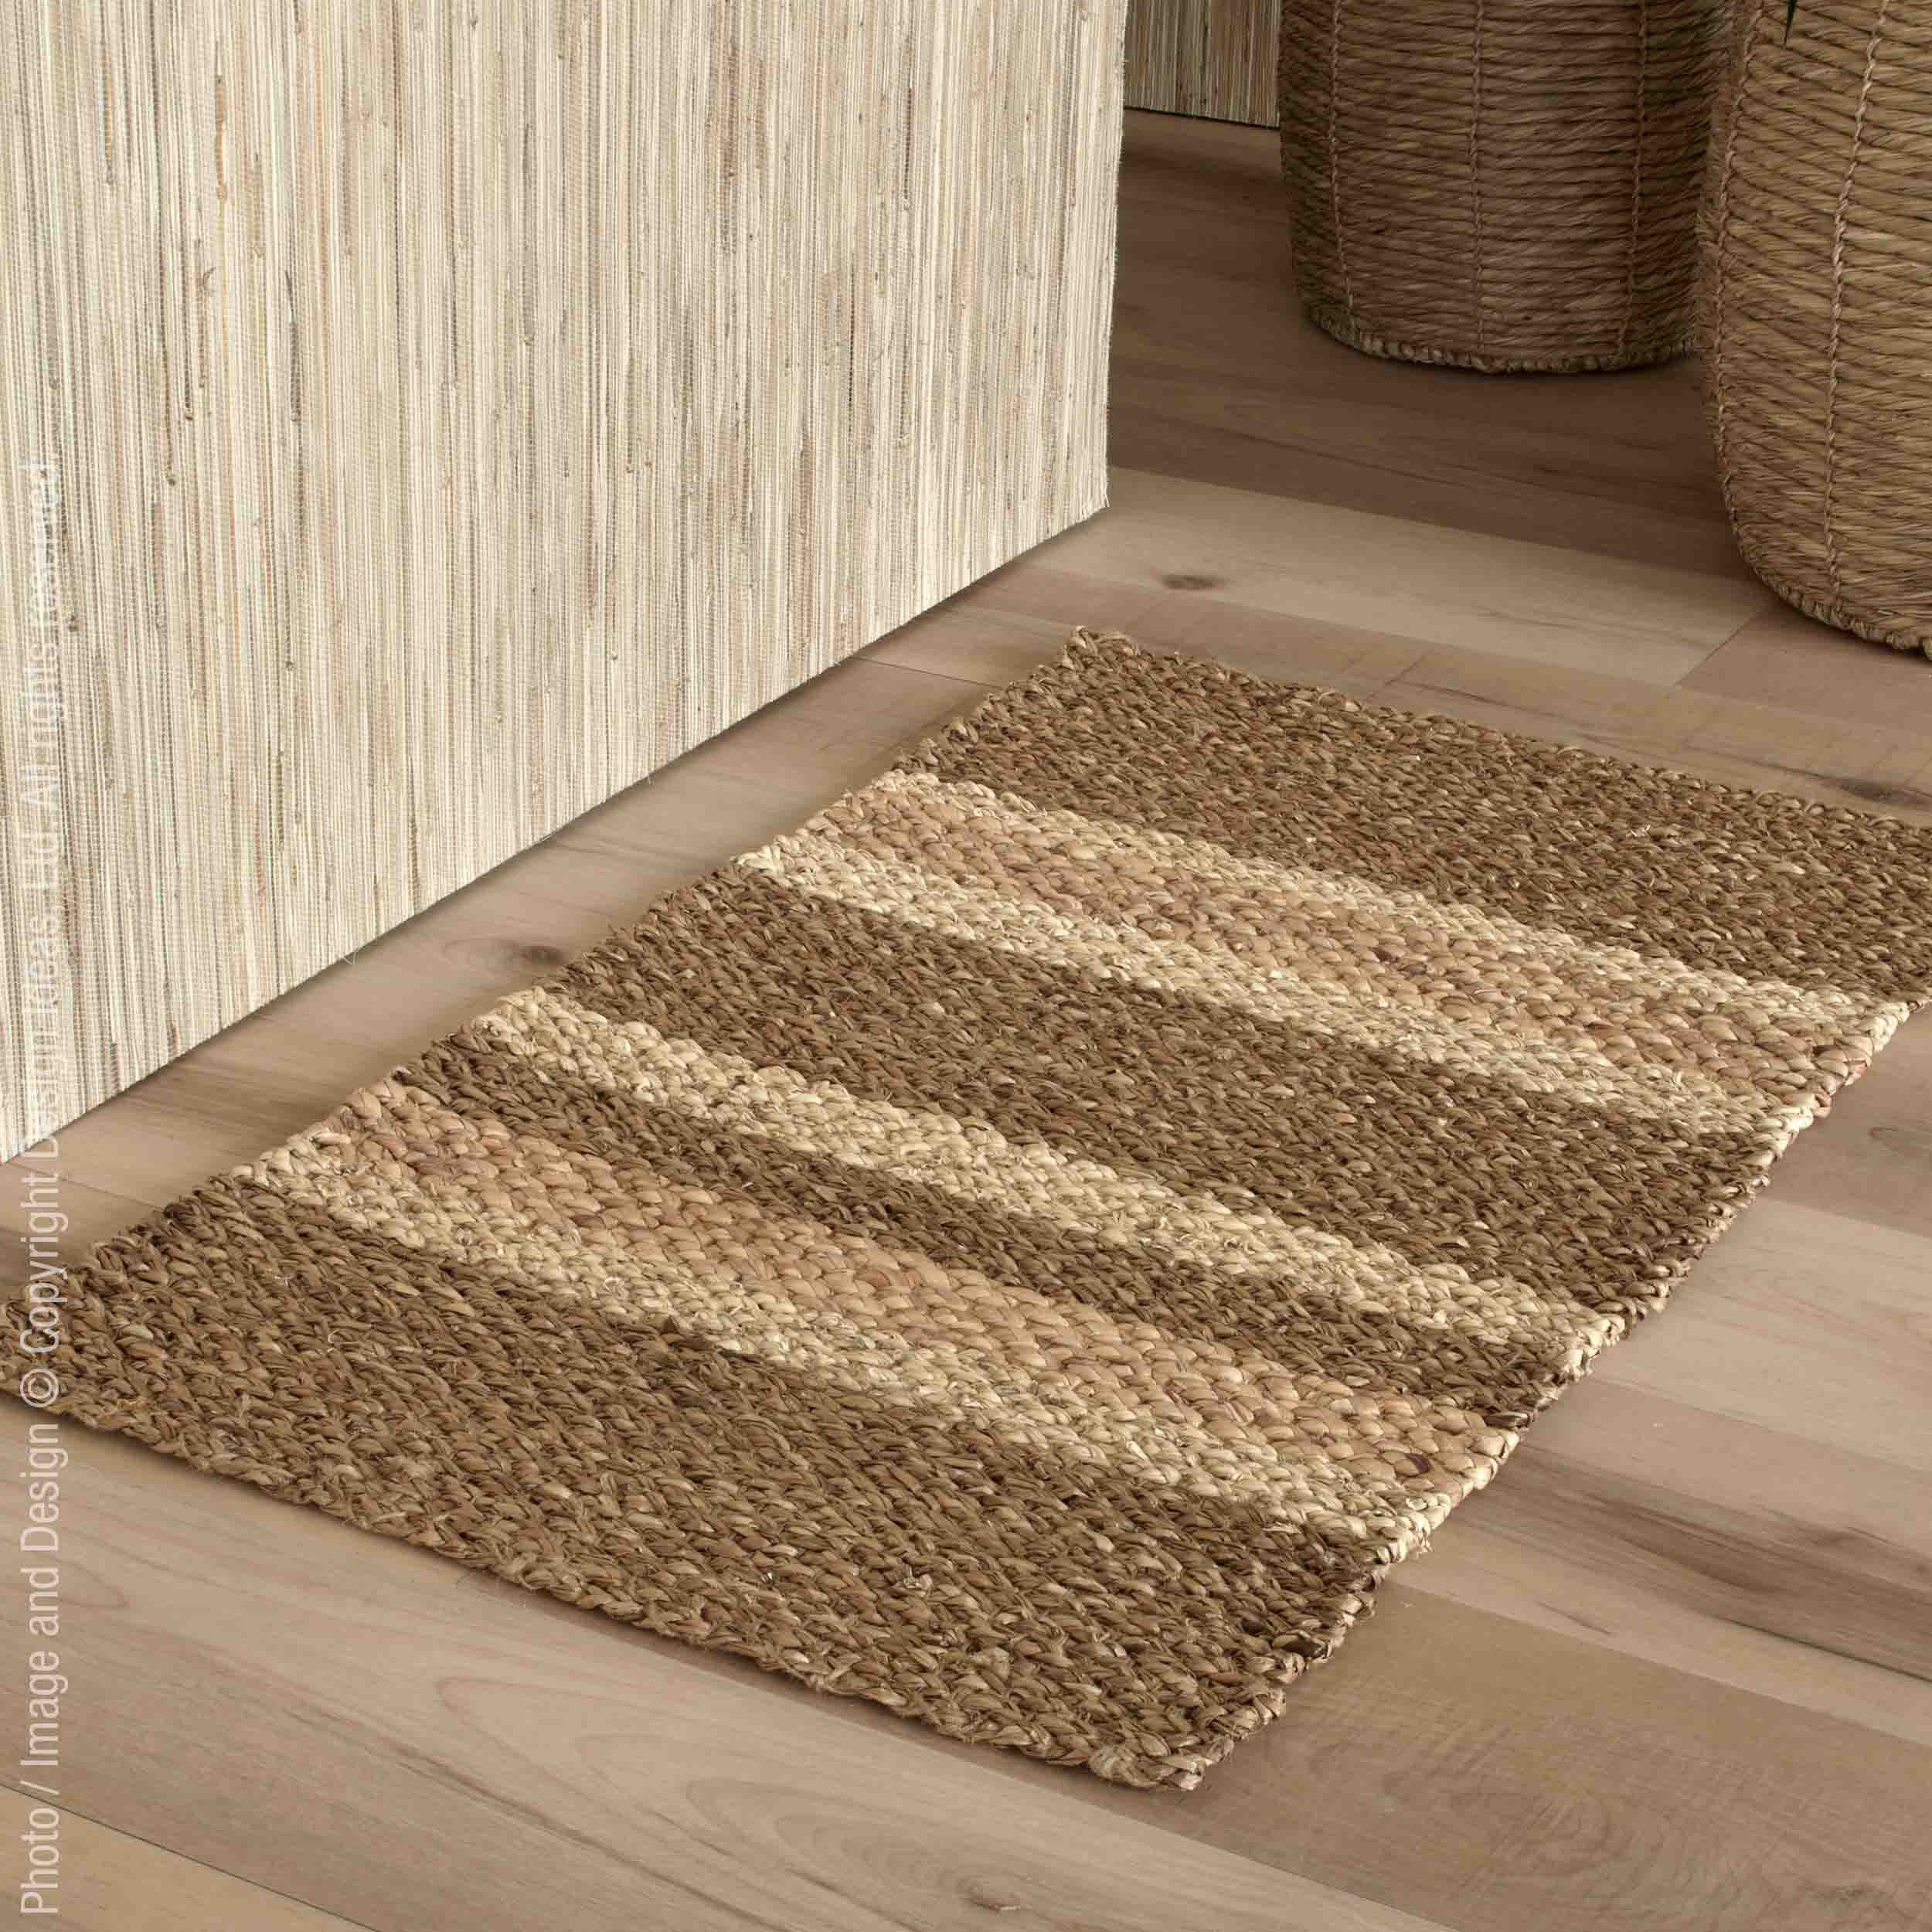 Barletta™ rug (35x24in.) - Natural | Image 1 | Premium Rug from the Barletta collection | made with Water Hyacinth Twine for long lasting use | texxture